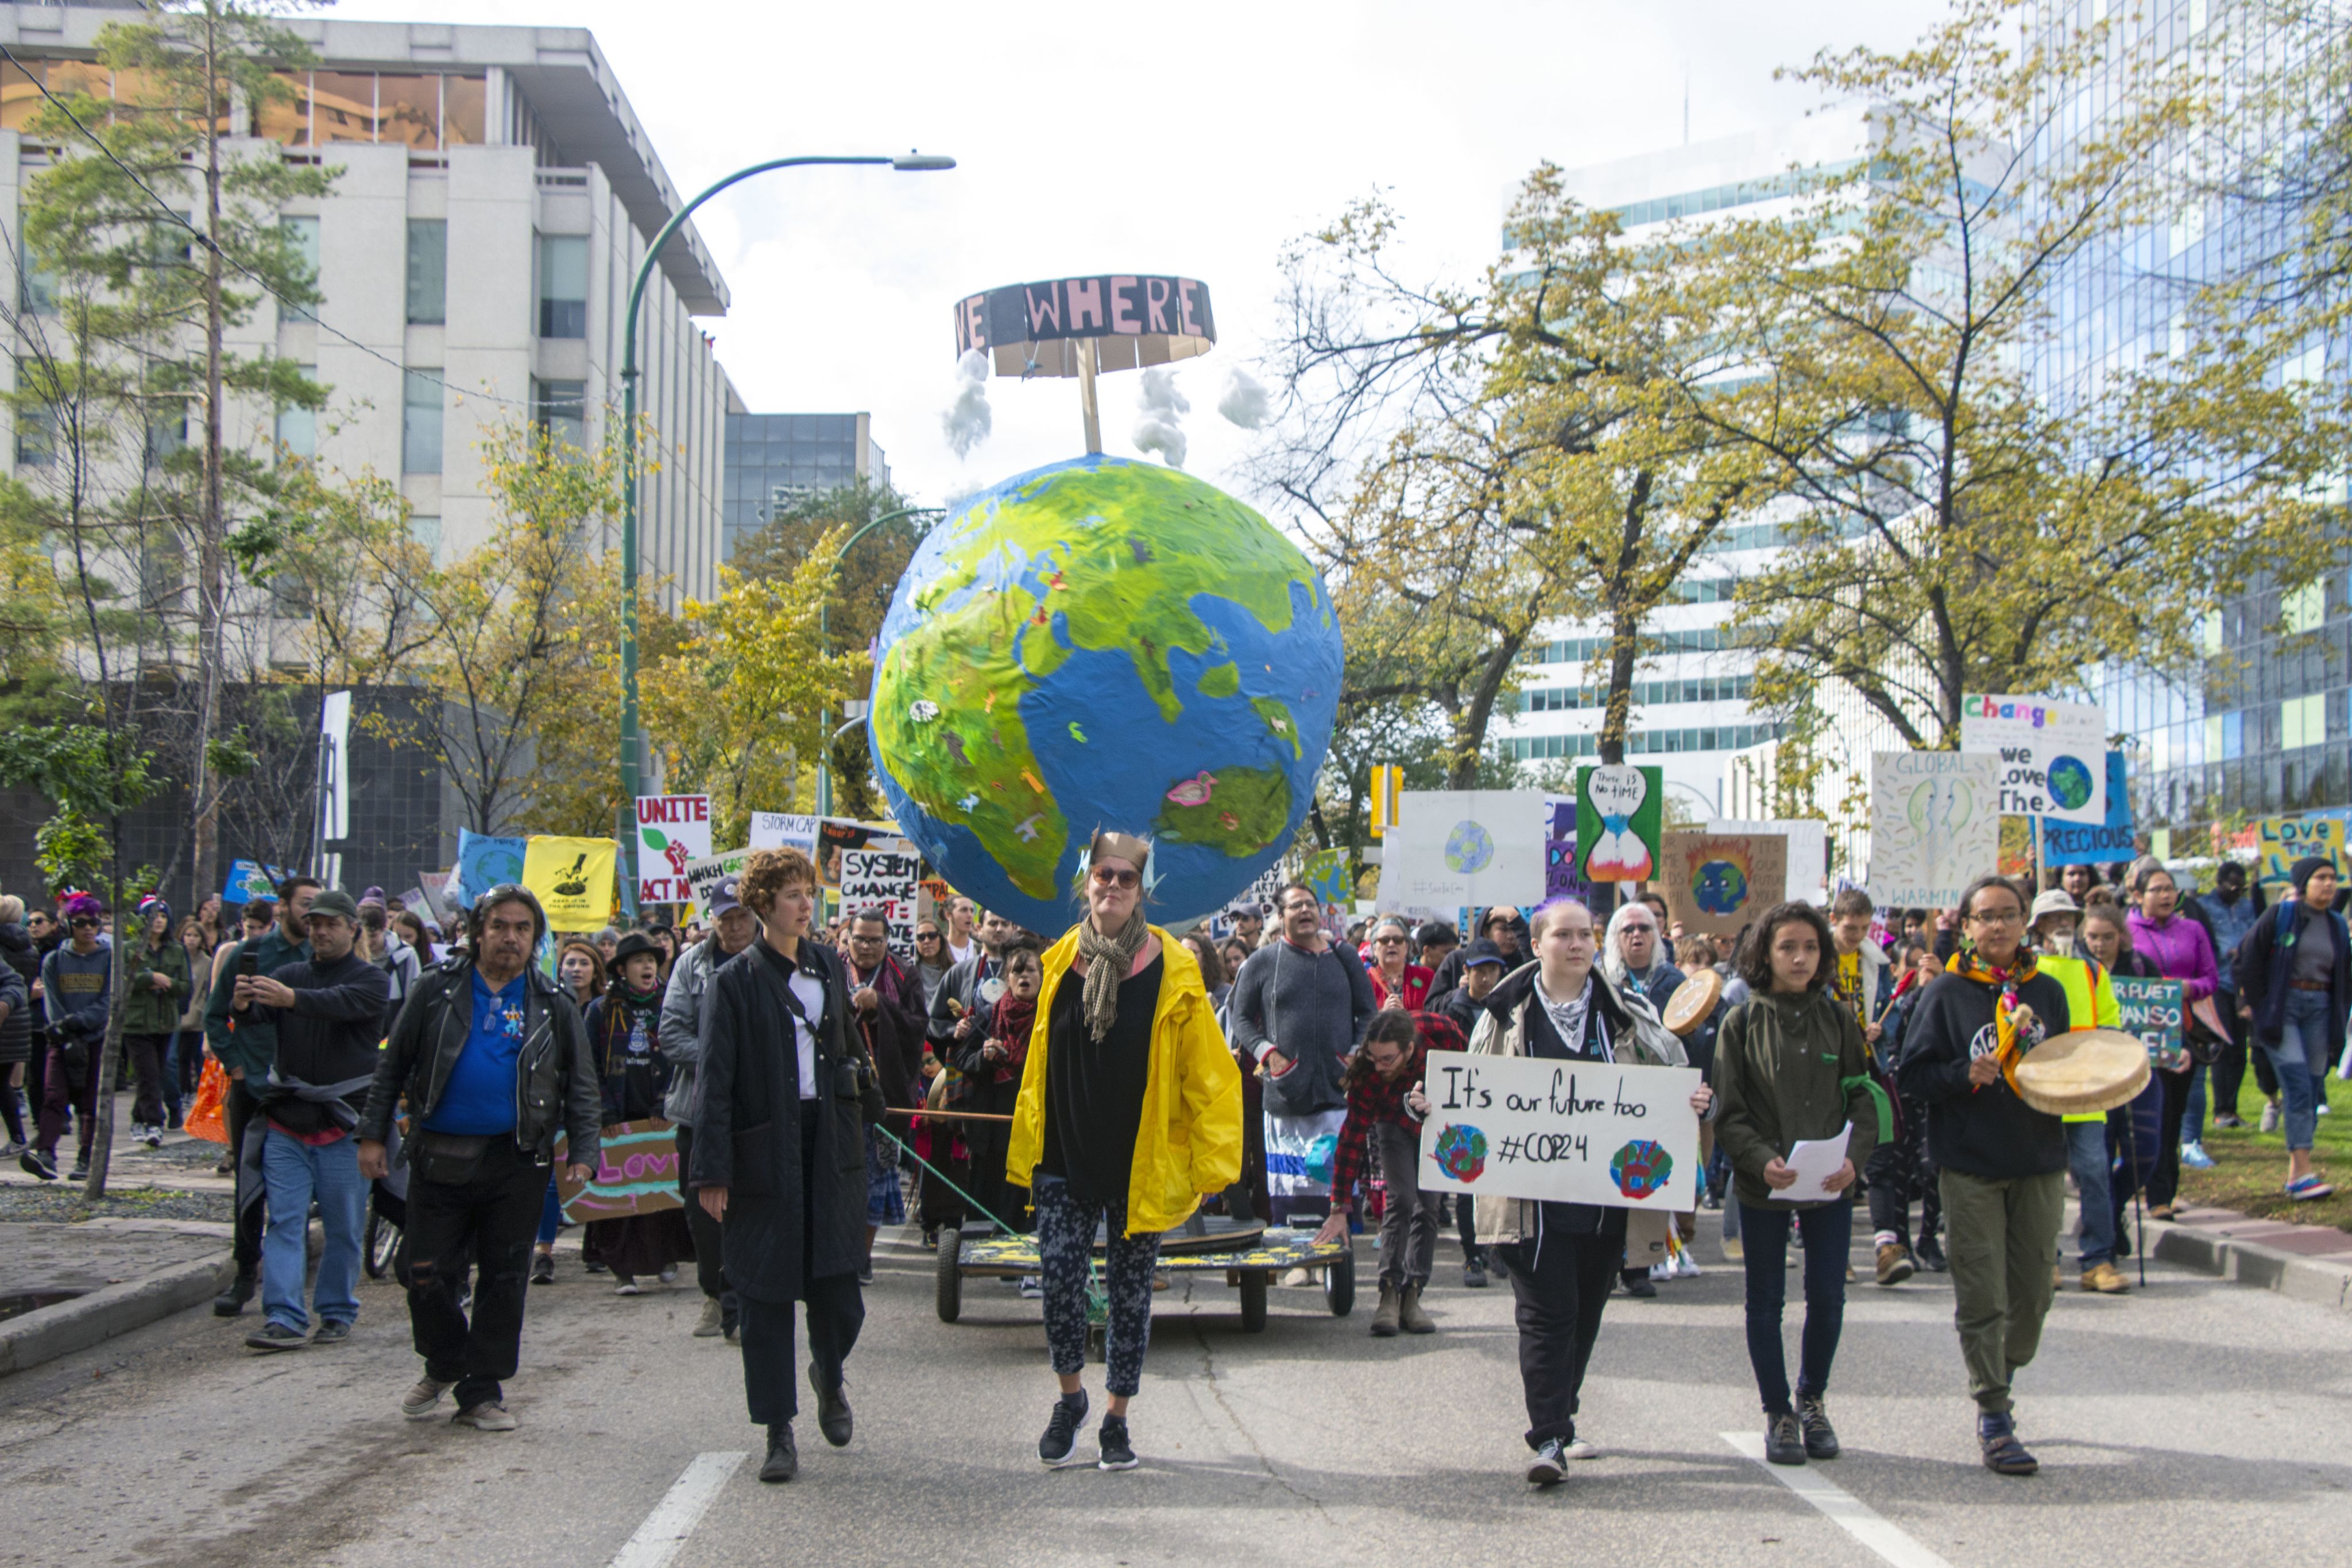 Front line of a climate march walks down the street in Winnipeg in front of a large globe and thousands of people following them.